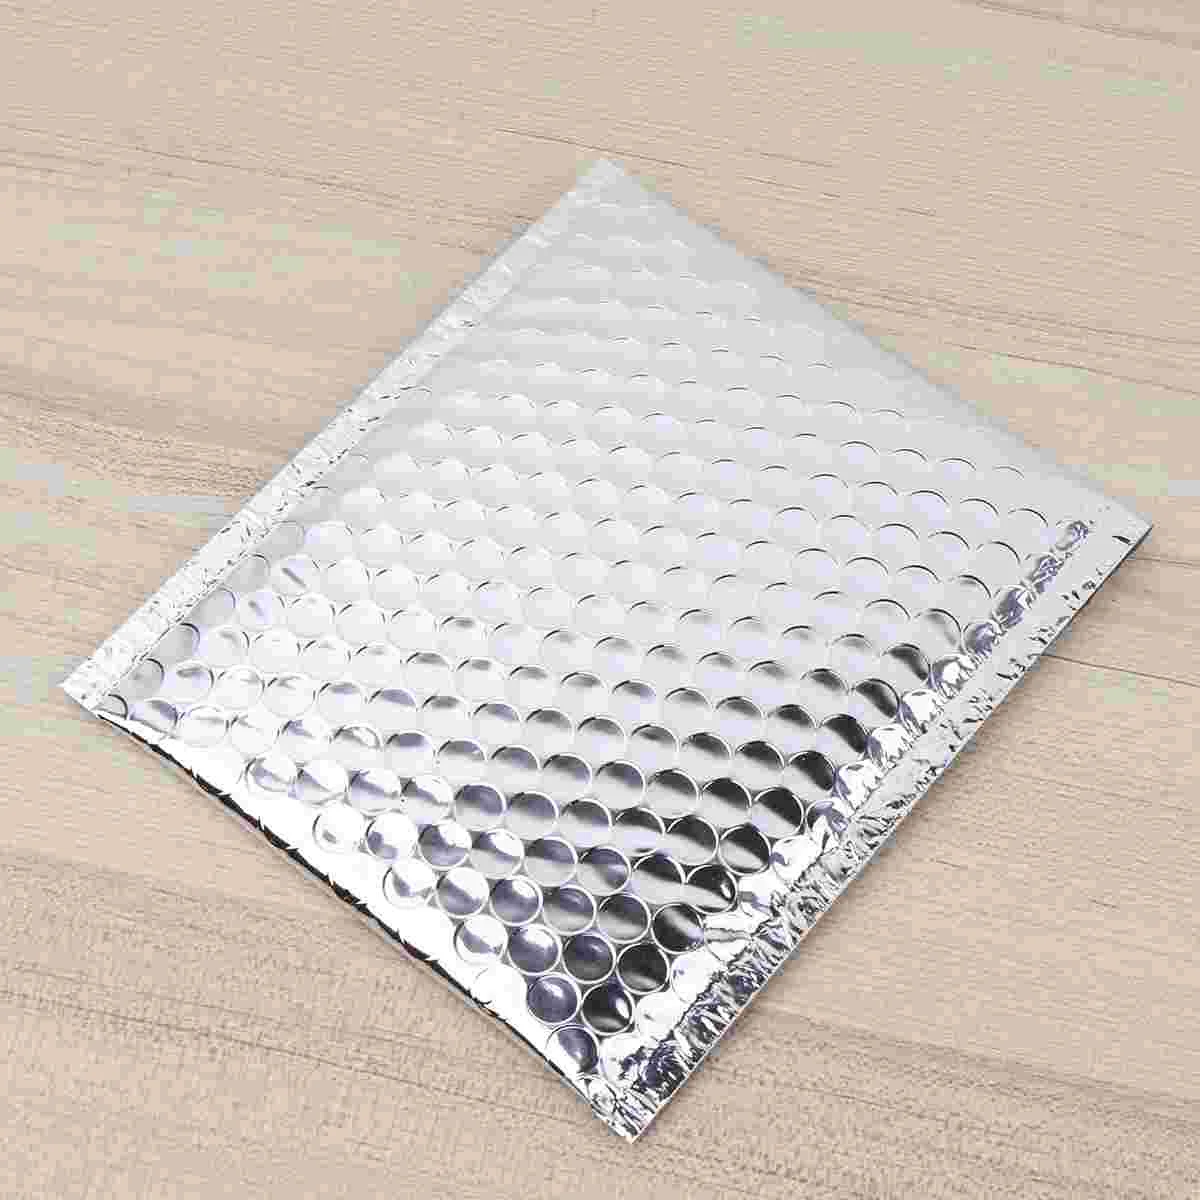 28 Pcs Bubble Bag Shockproof Packaging Metal Small Envelope Waterproof Logistic Express 50pcs 11 13cm white bubble envelope film pearl shockproof courier bag postal transport packaging stationery accessories